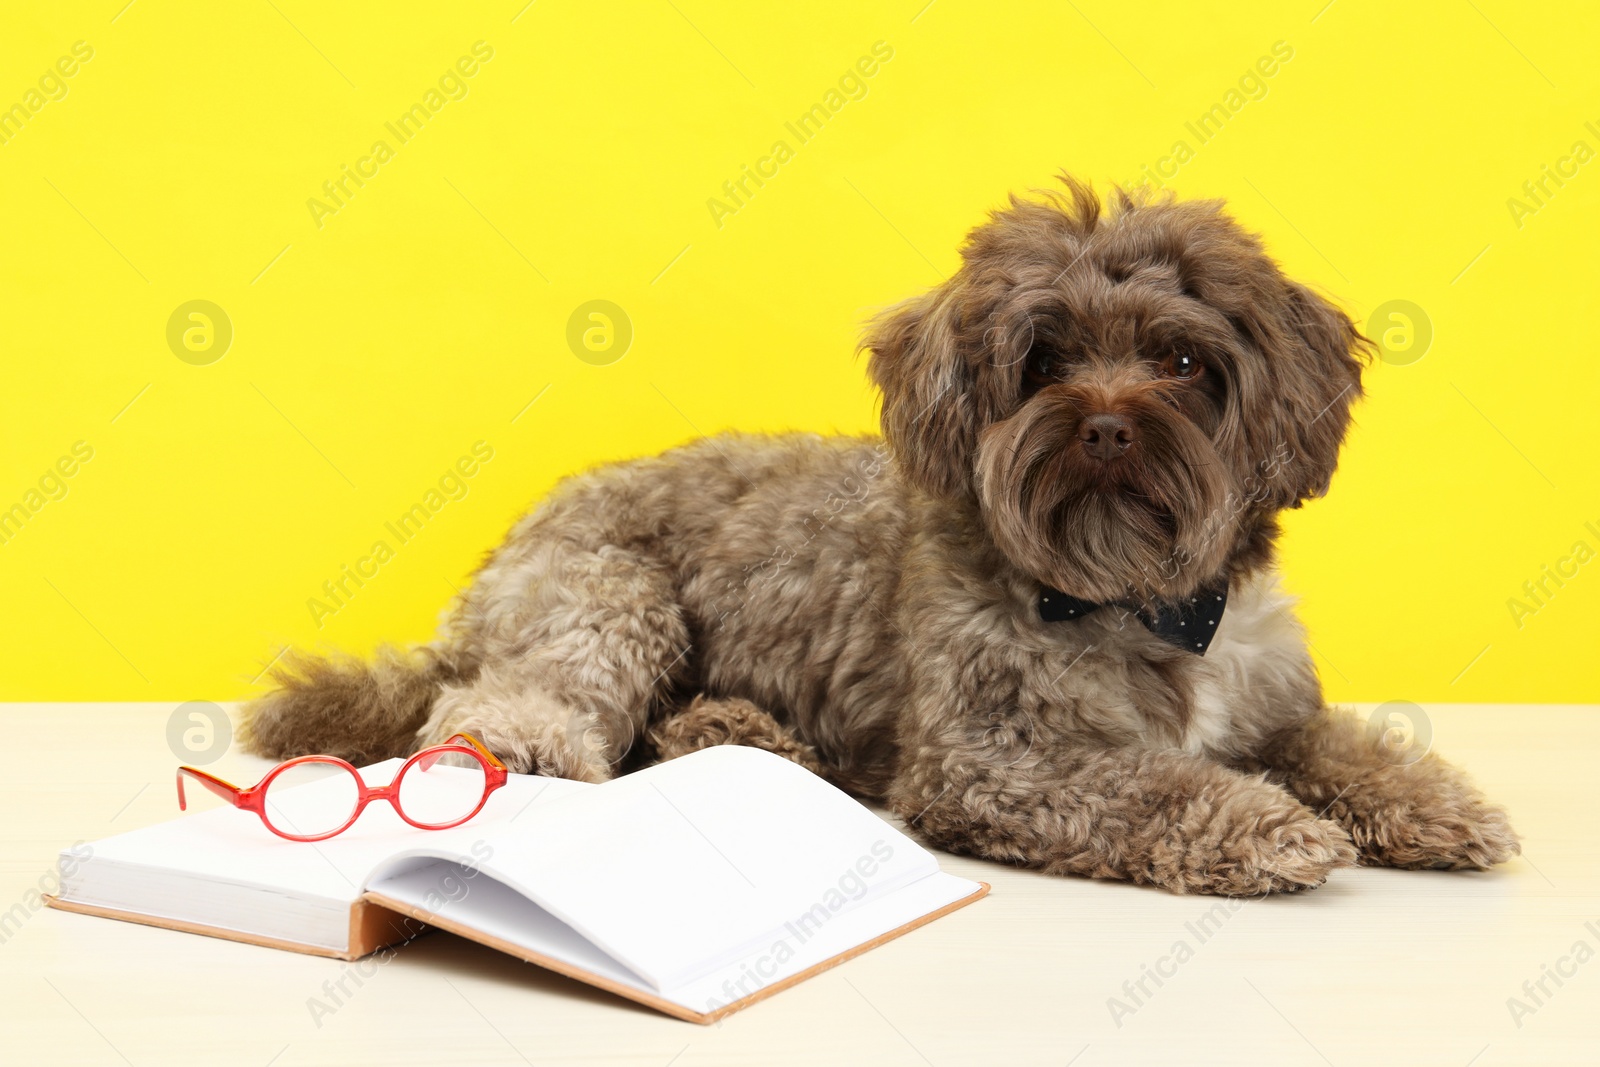 Photo of Cute Maltipoo dog with book and glasses on white table against yellow background. Lovely pet